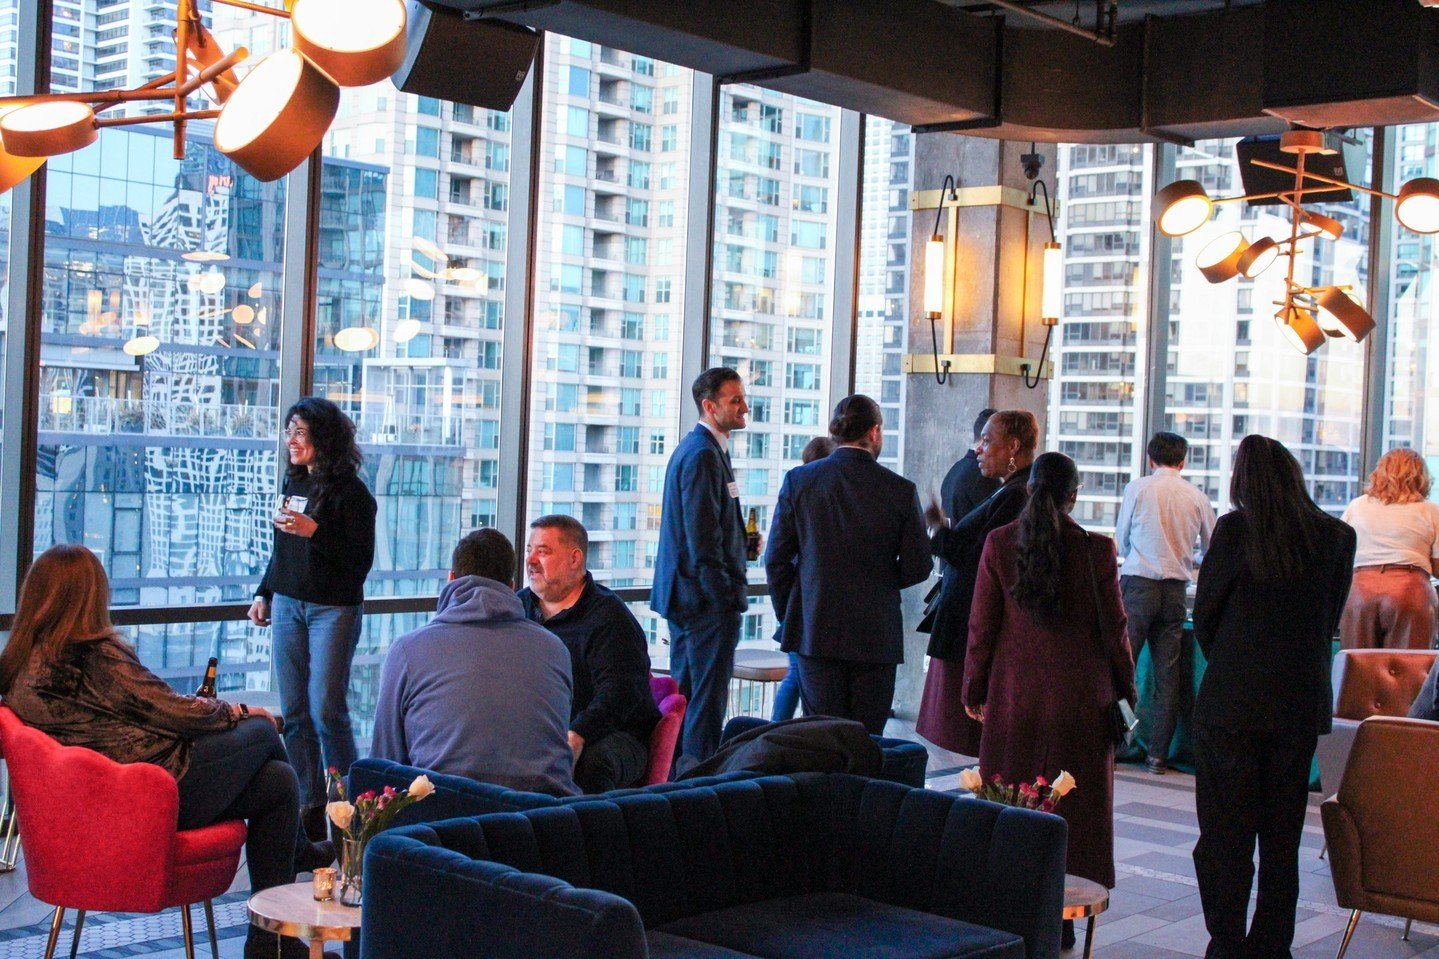 Throwback to one of our favorite events of the year with the @rivernorthresidentsassoc! We loved to mix &amp; mingle with our neighborhood residents here with amazing views, drinks, and food! 
.
.
.
#twentysixchicago #eventvenue #chicagoevents #chica